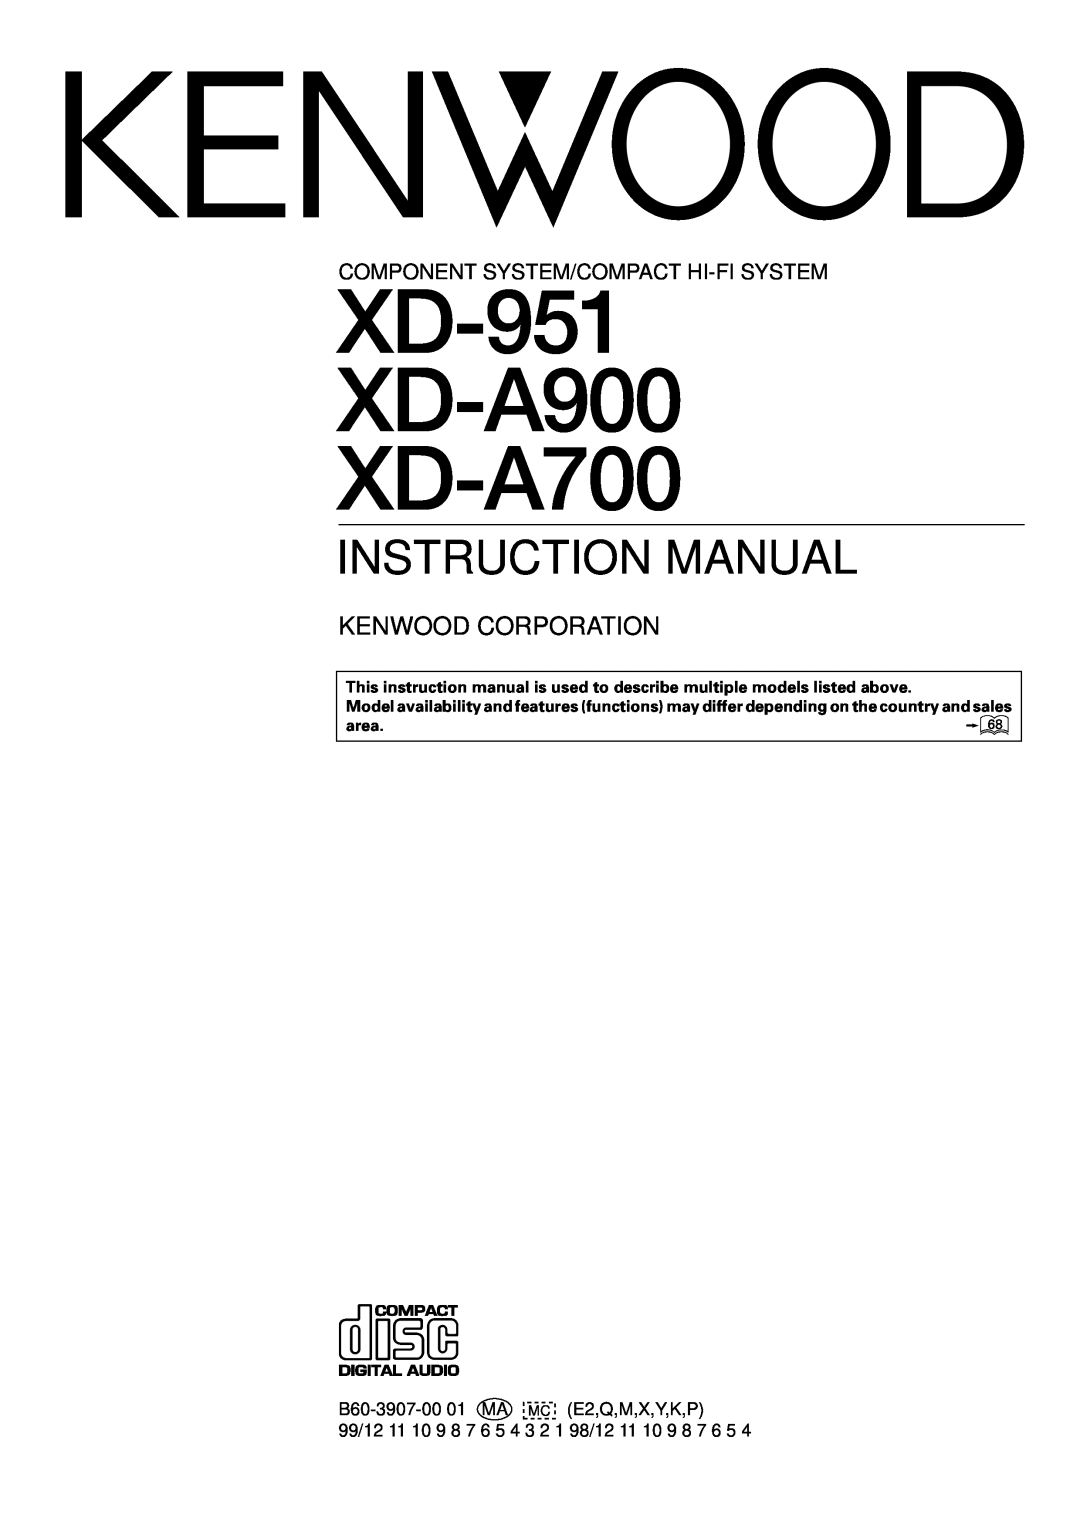 Kenwood instruction manual XD-951 XD-A900 XD-A700, Kenwood Corporation, Component System/Compact Hi-Fisystem 